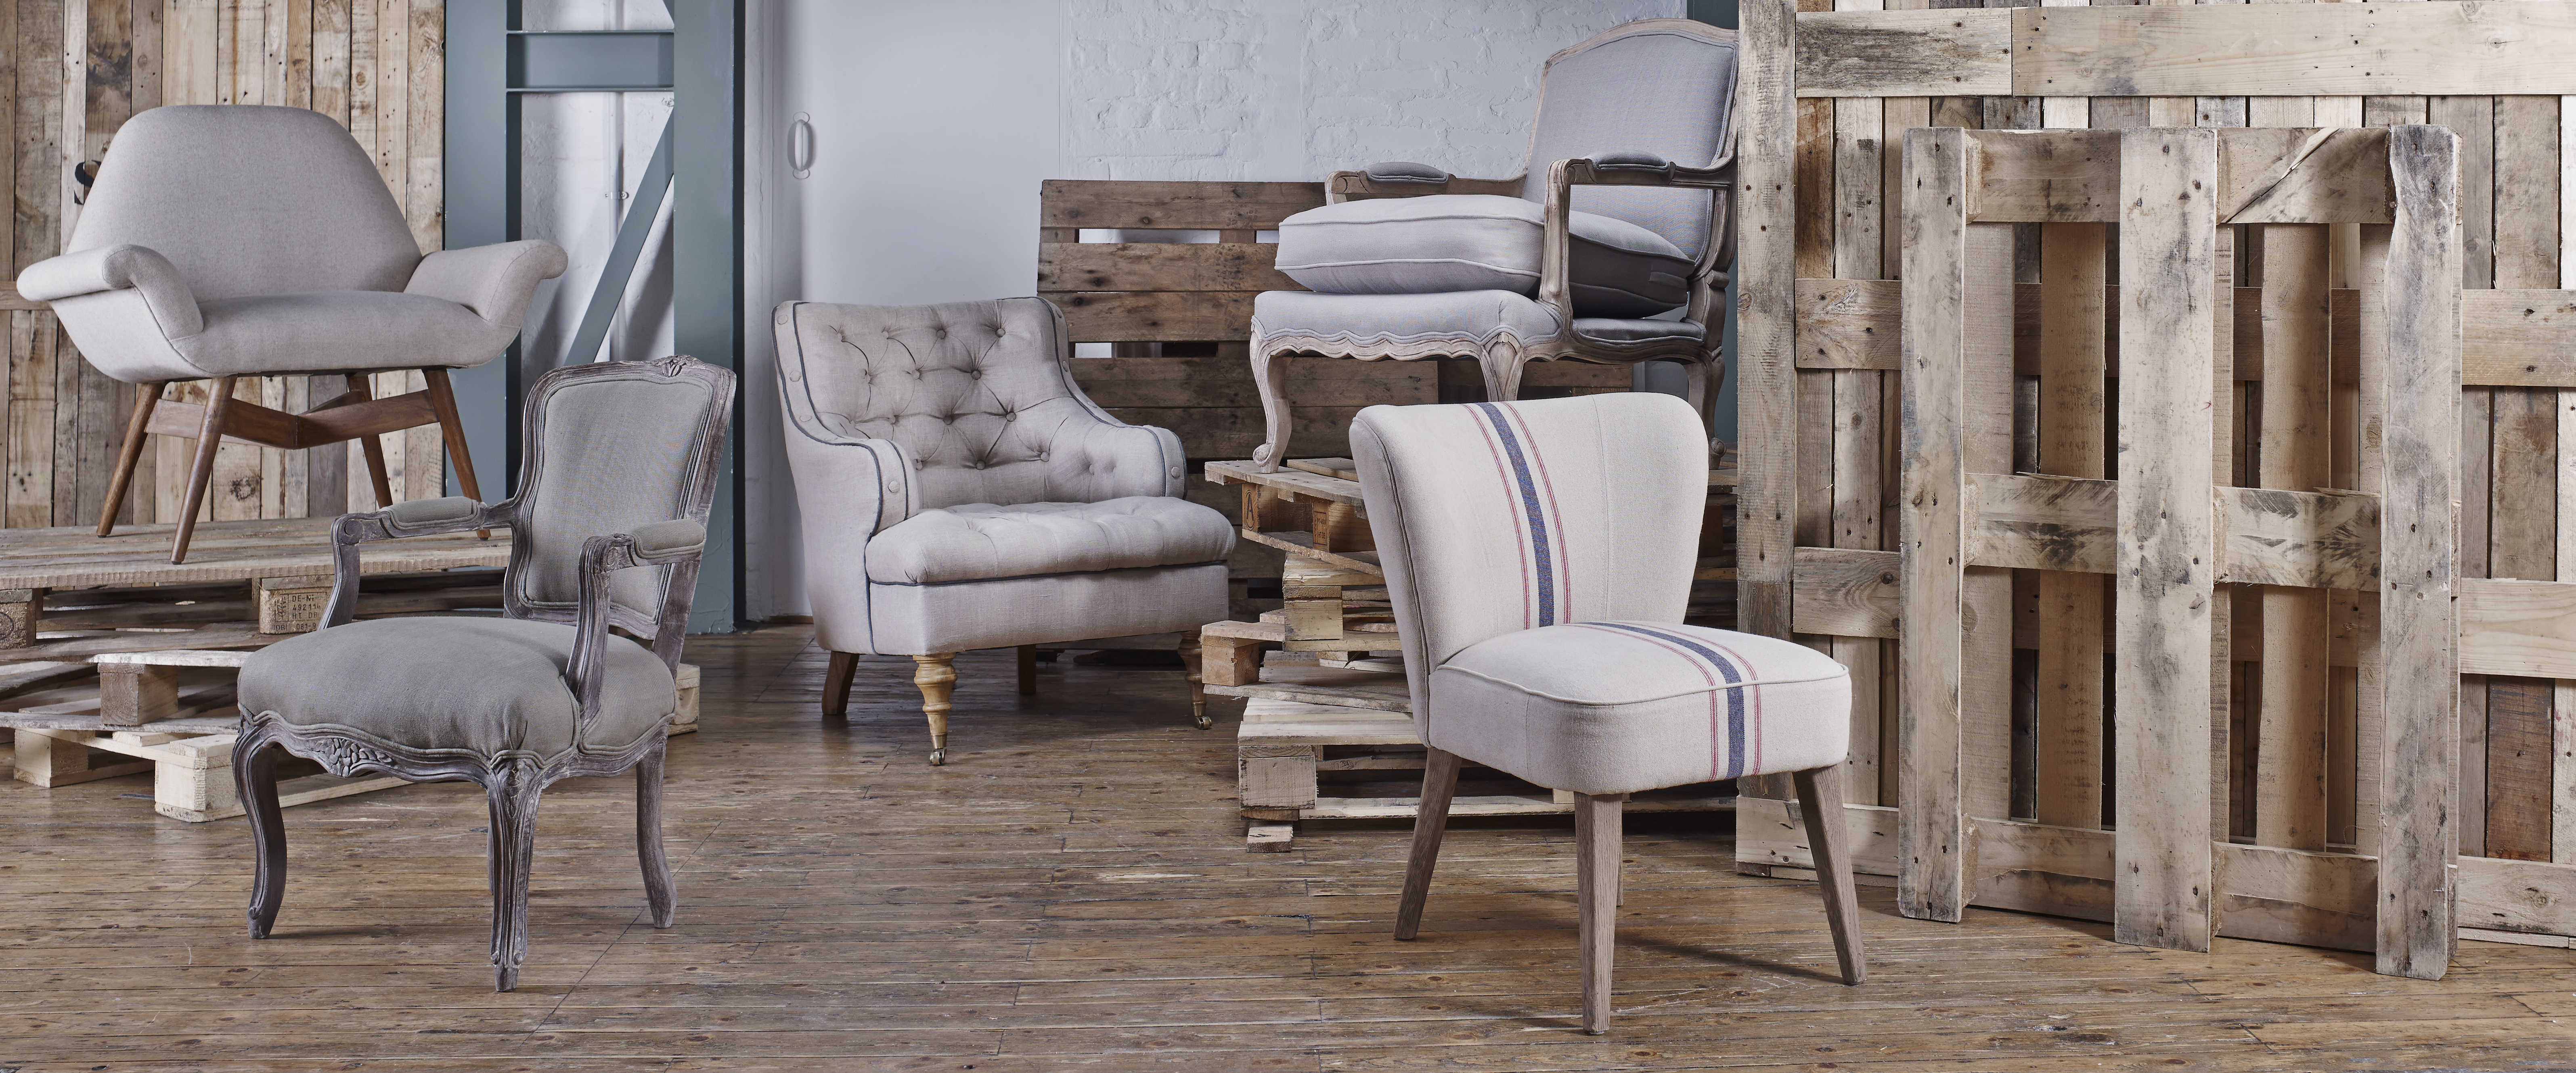 Swoon Editions furniture collection